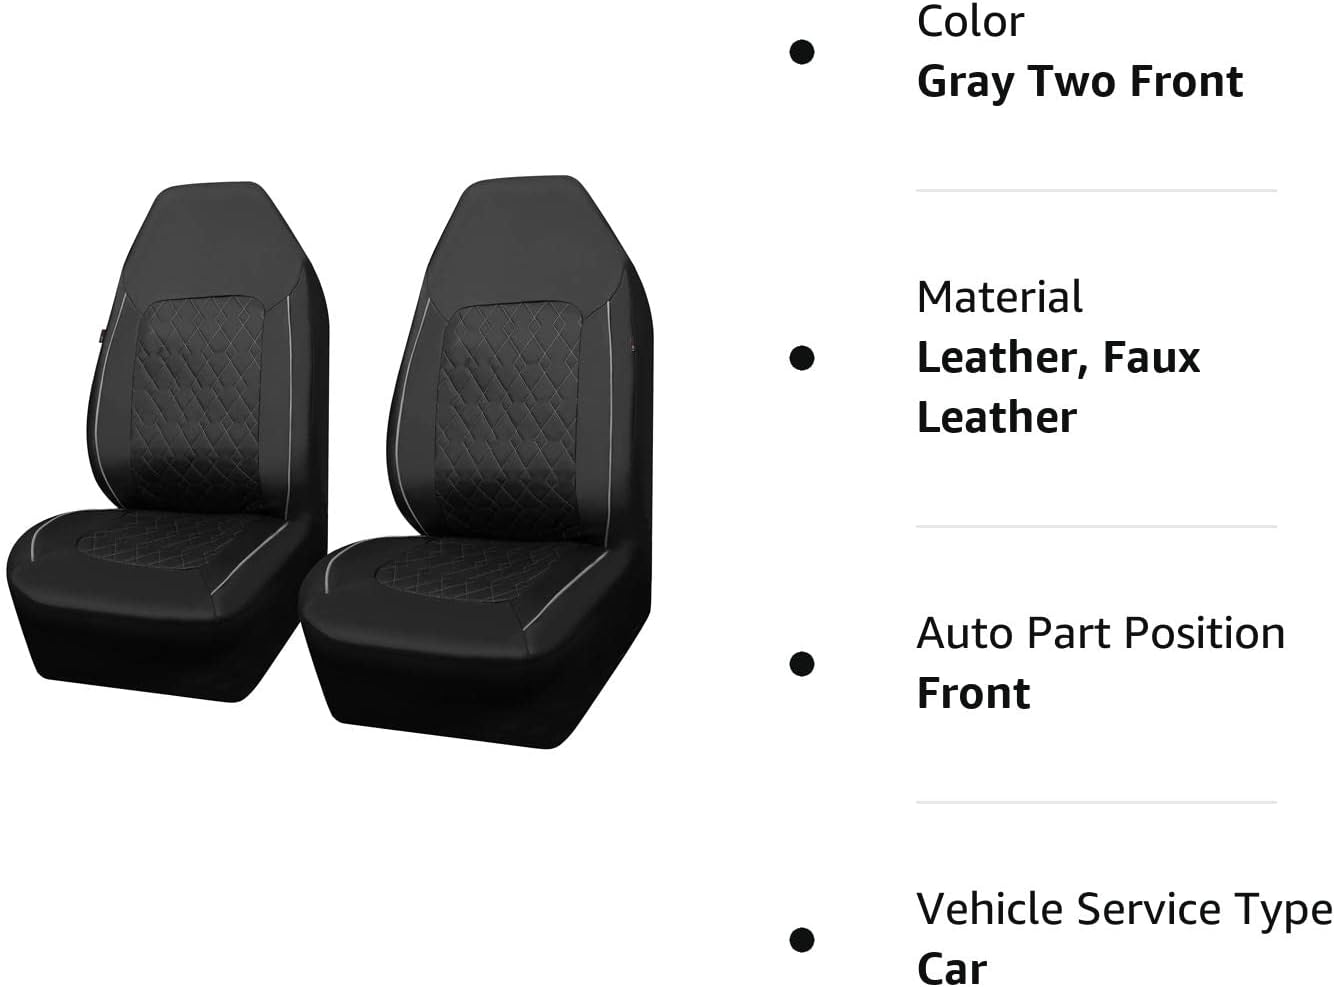 CAR PASS Universal FIT Piping Leather Car Seat Cover, for suvs,Van,Trucks,Airbag Compatible,Inside Zipper Design and Reserved Opening Holes (Full Set, Black and Purple)